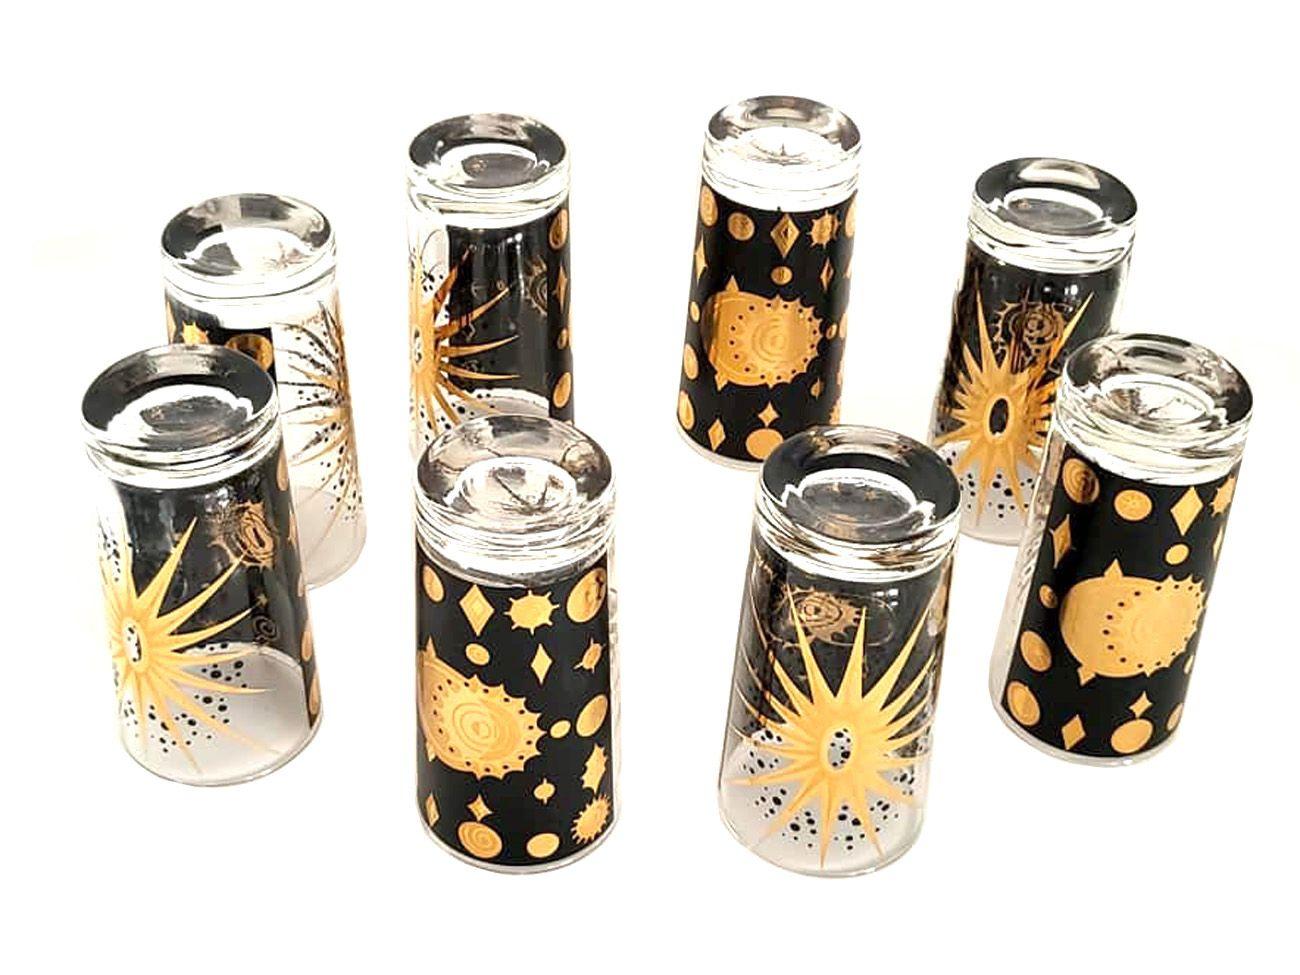 1960s Fred Press Eclipse sunburst glasses, black ,22k gold, set of 8

Offered for sale is a set of eight Fred Press Eclipse Sunburst glasses in black and 22K gold. These gorgeous vintage highball cocktail glasses are a midcentury Classic. Made by